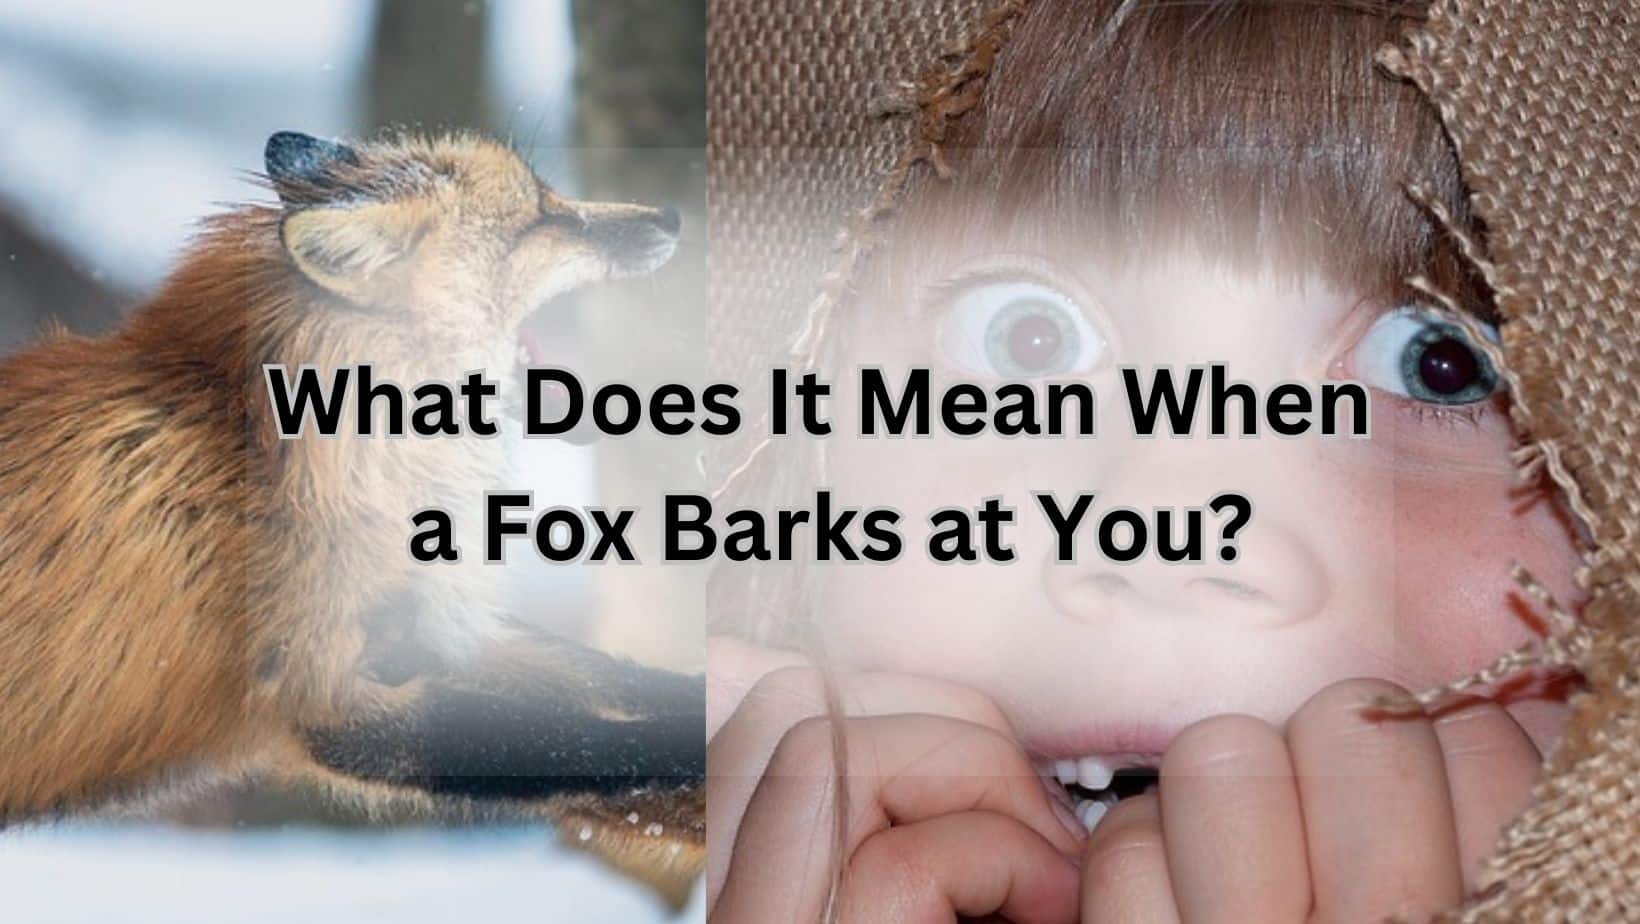 What Does It Mean When a Fox Barks at You?